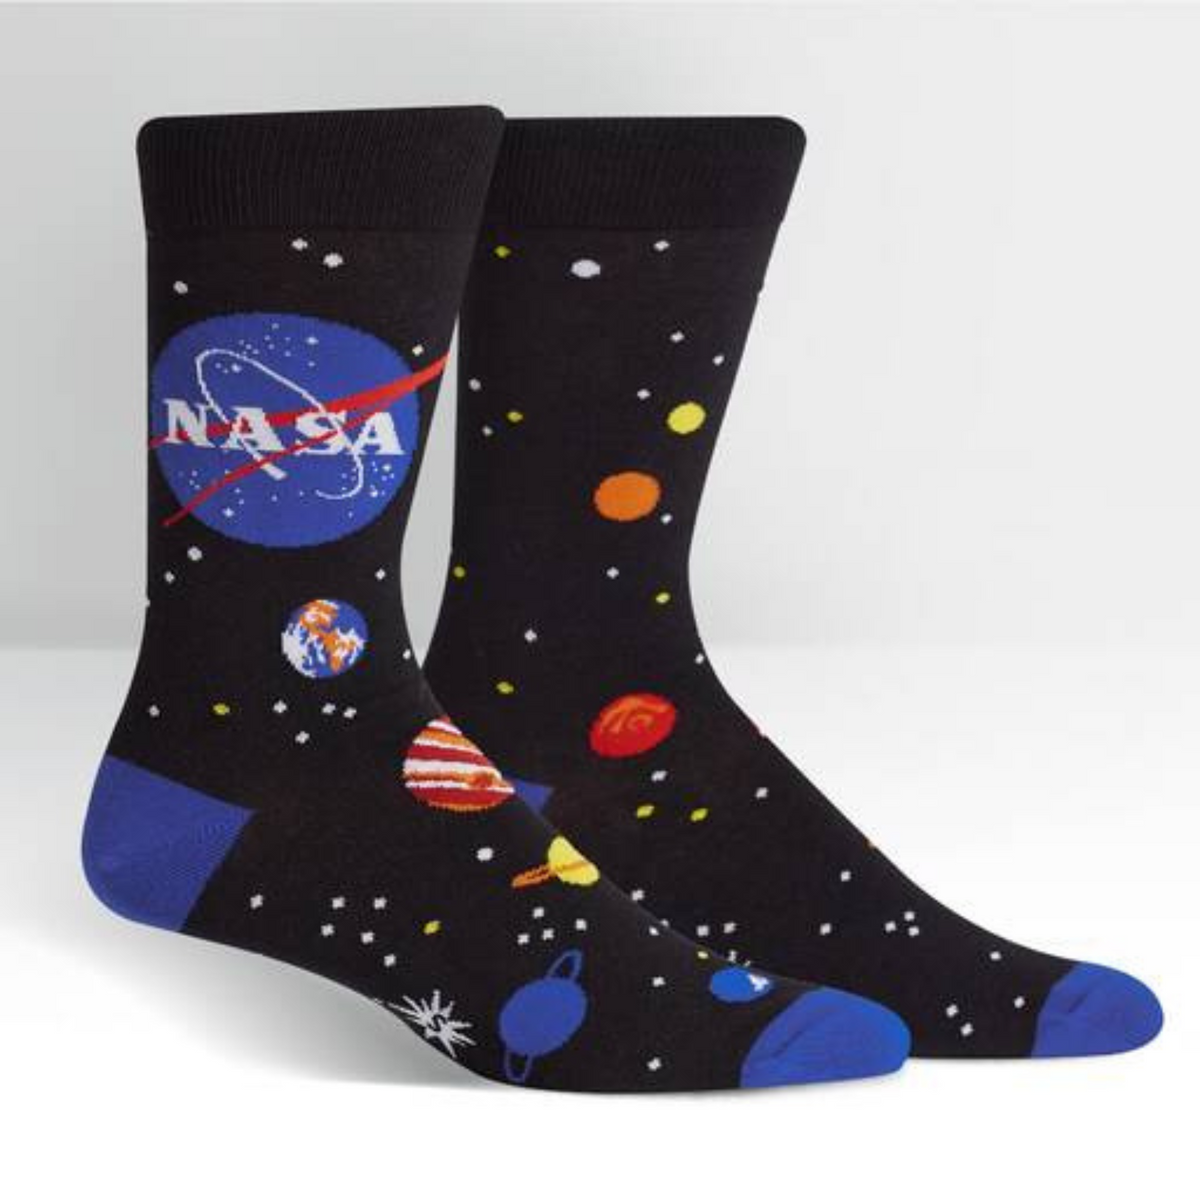 Sock It To Me NASA Solar System men&#39;s crew socks featuring black sock with NASA logo and planets all over. Socks shown on display feet. 